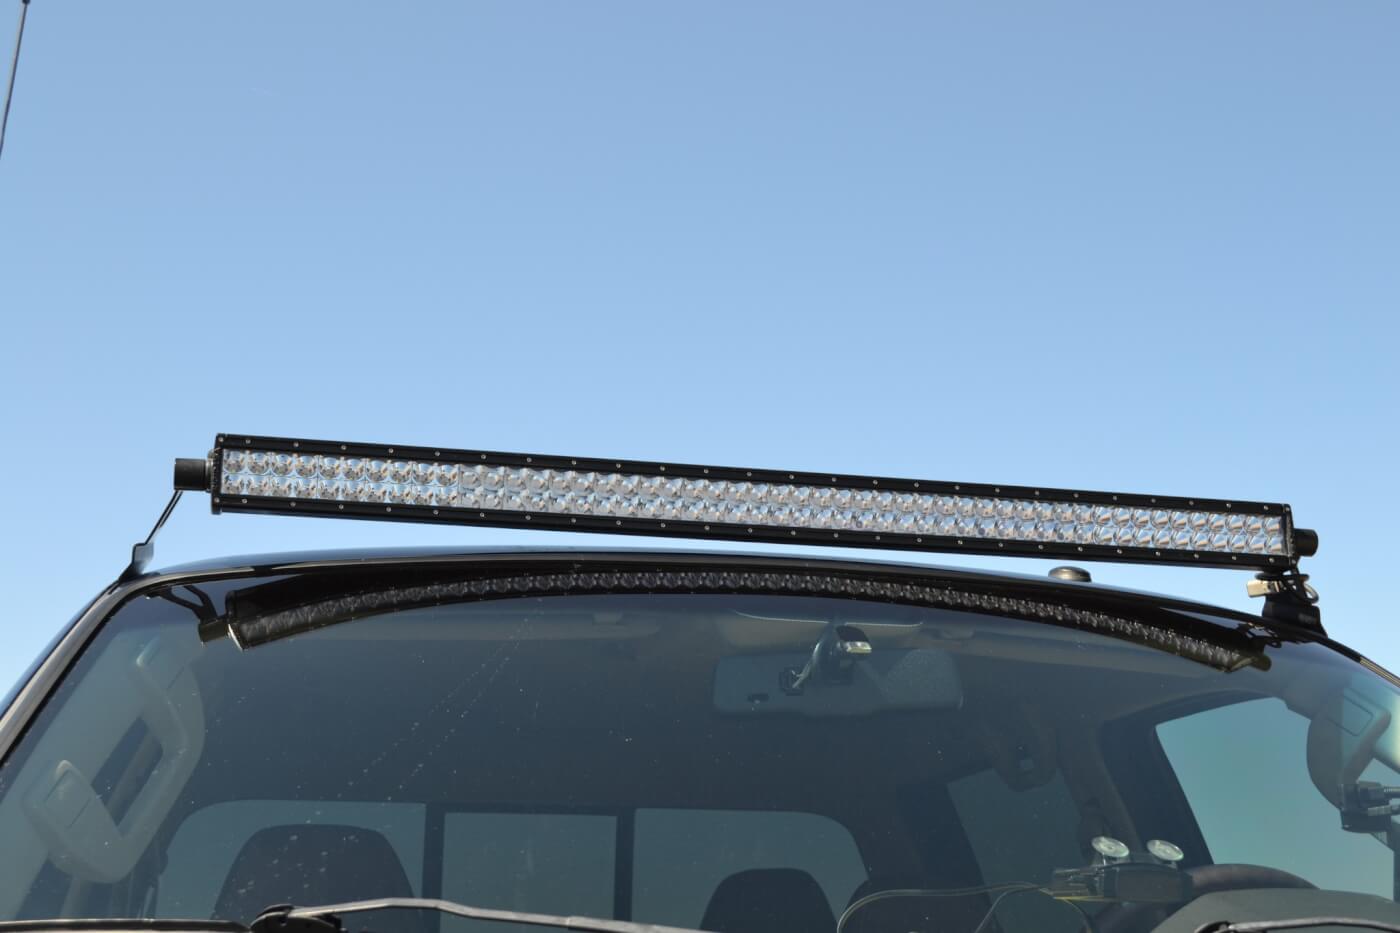 A Rigid Industries light bar illuminates the desert when the truck hits the sand. Rigid lighting is used throughout the truck, and light bars can also be found in the front and rear bumpers.